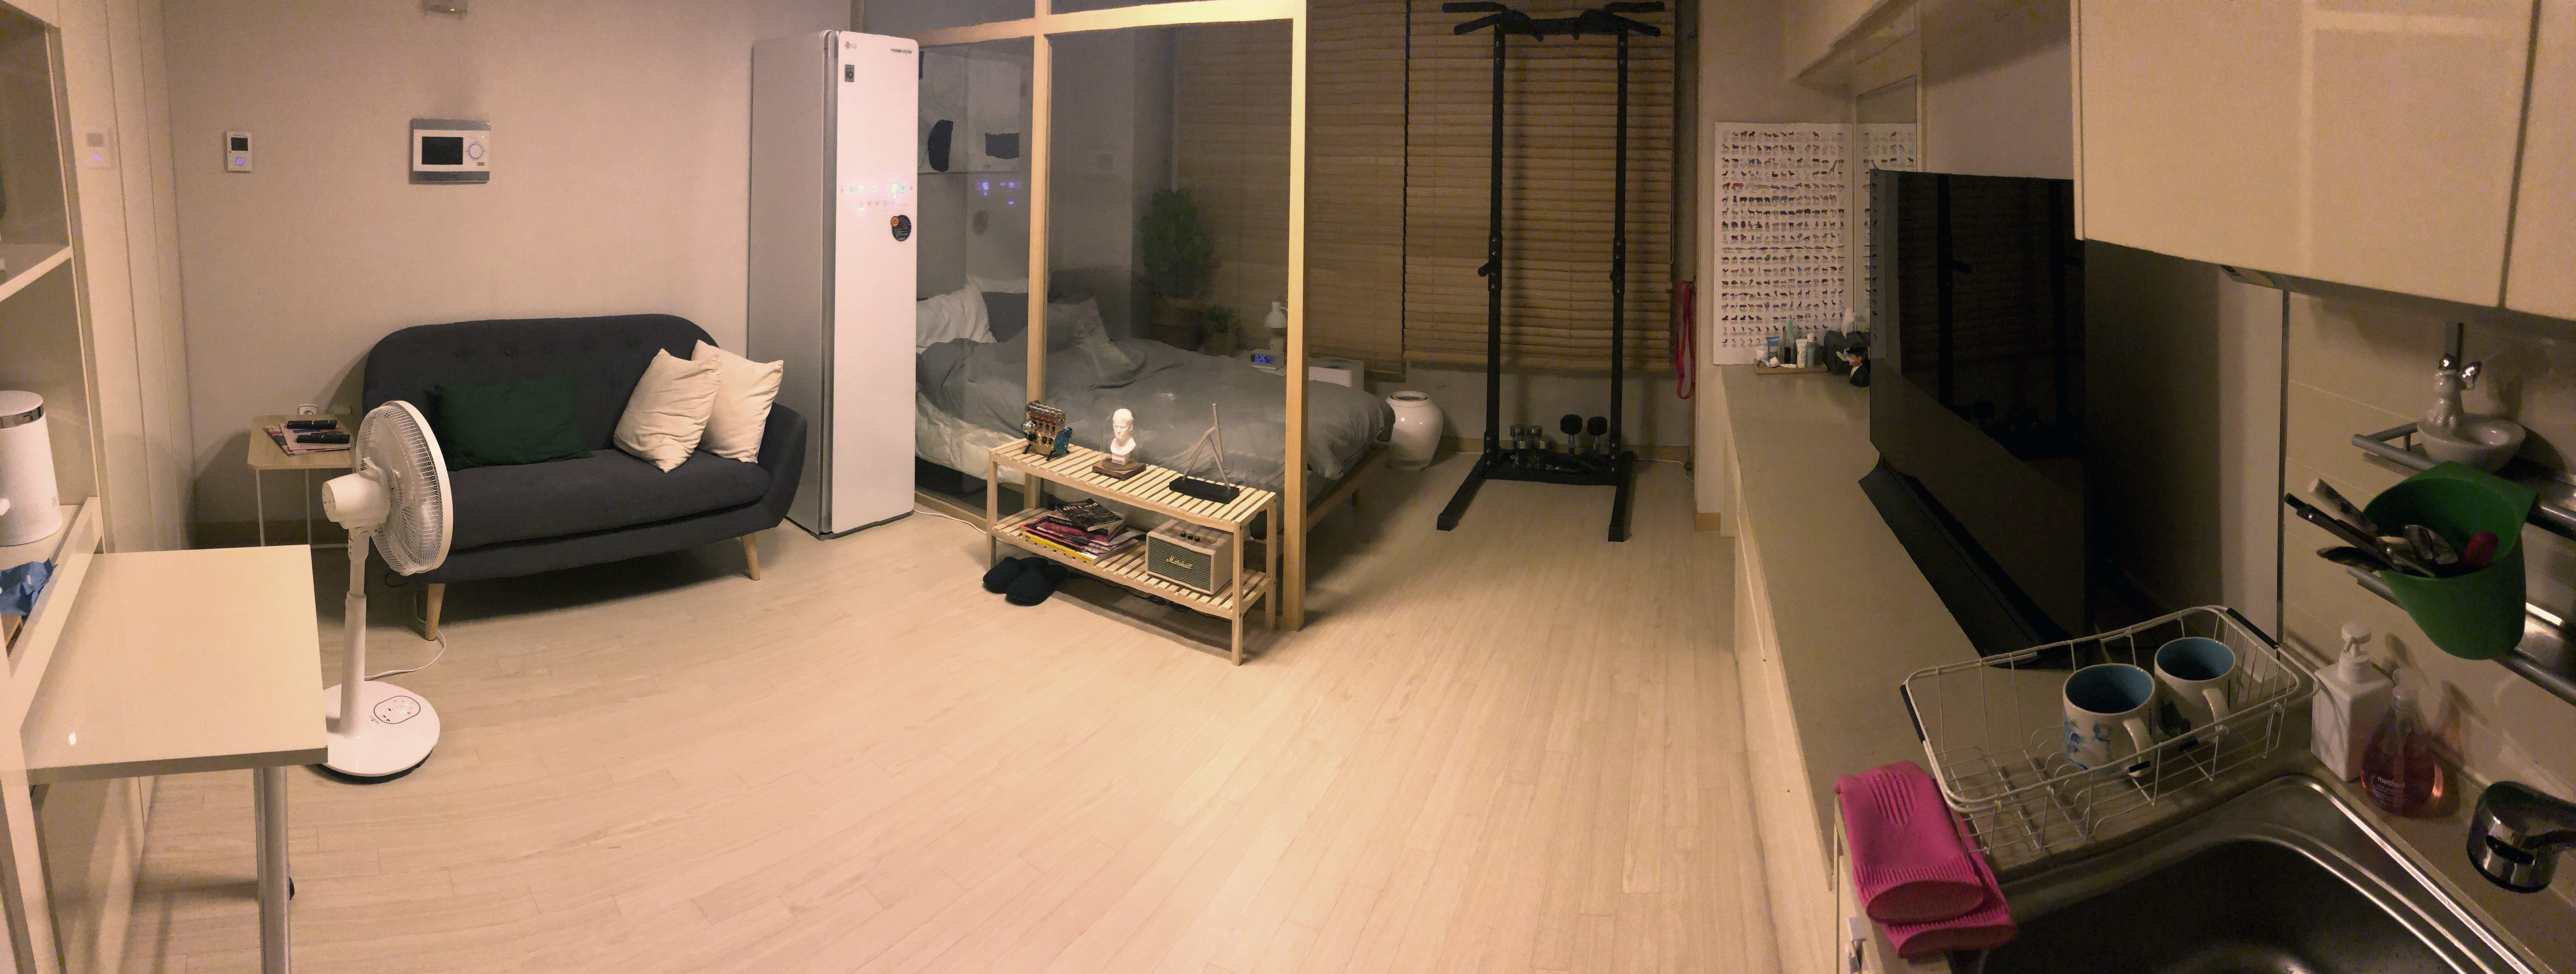 Jang Dae-ik lives in a 356 sq ft studio apartment near Dangsan station in central Seoul. Photo: Handout